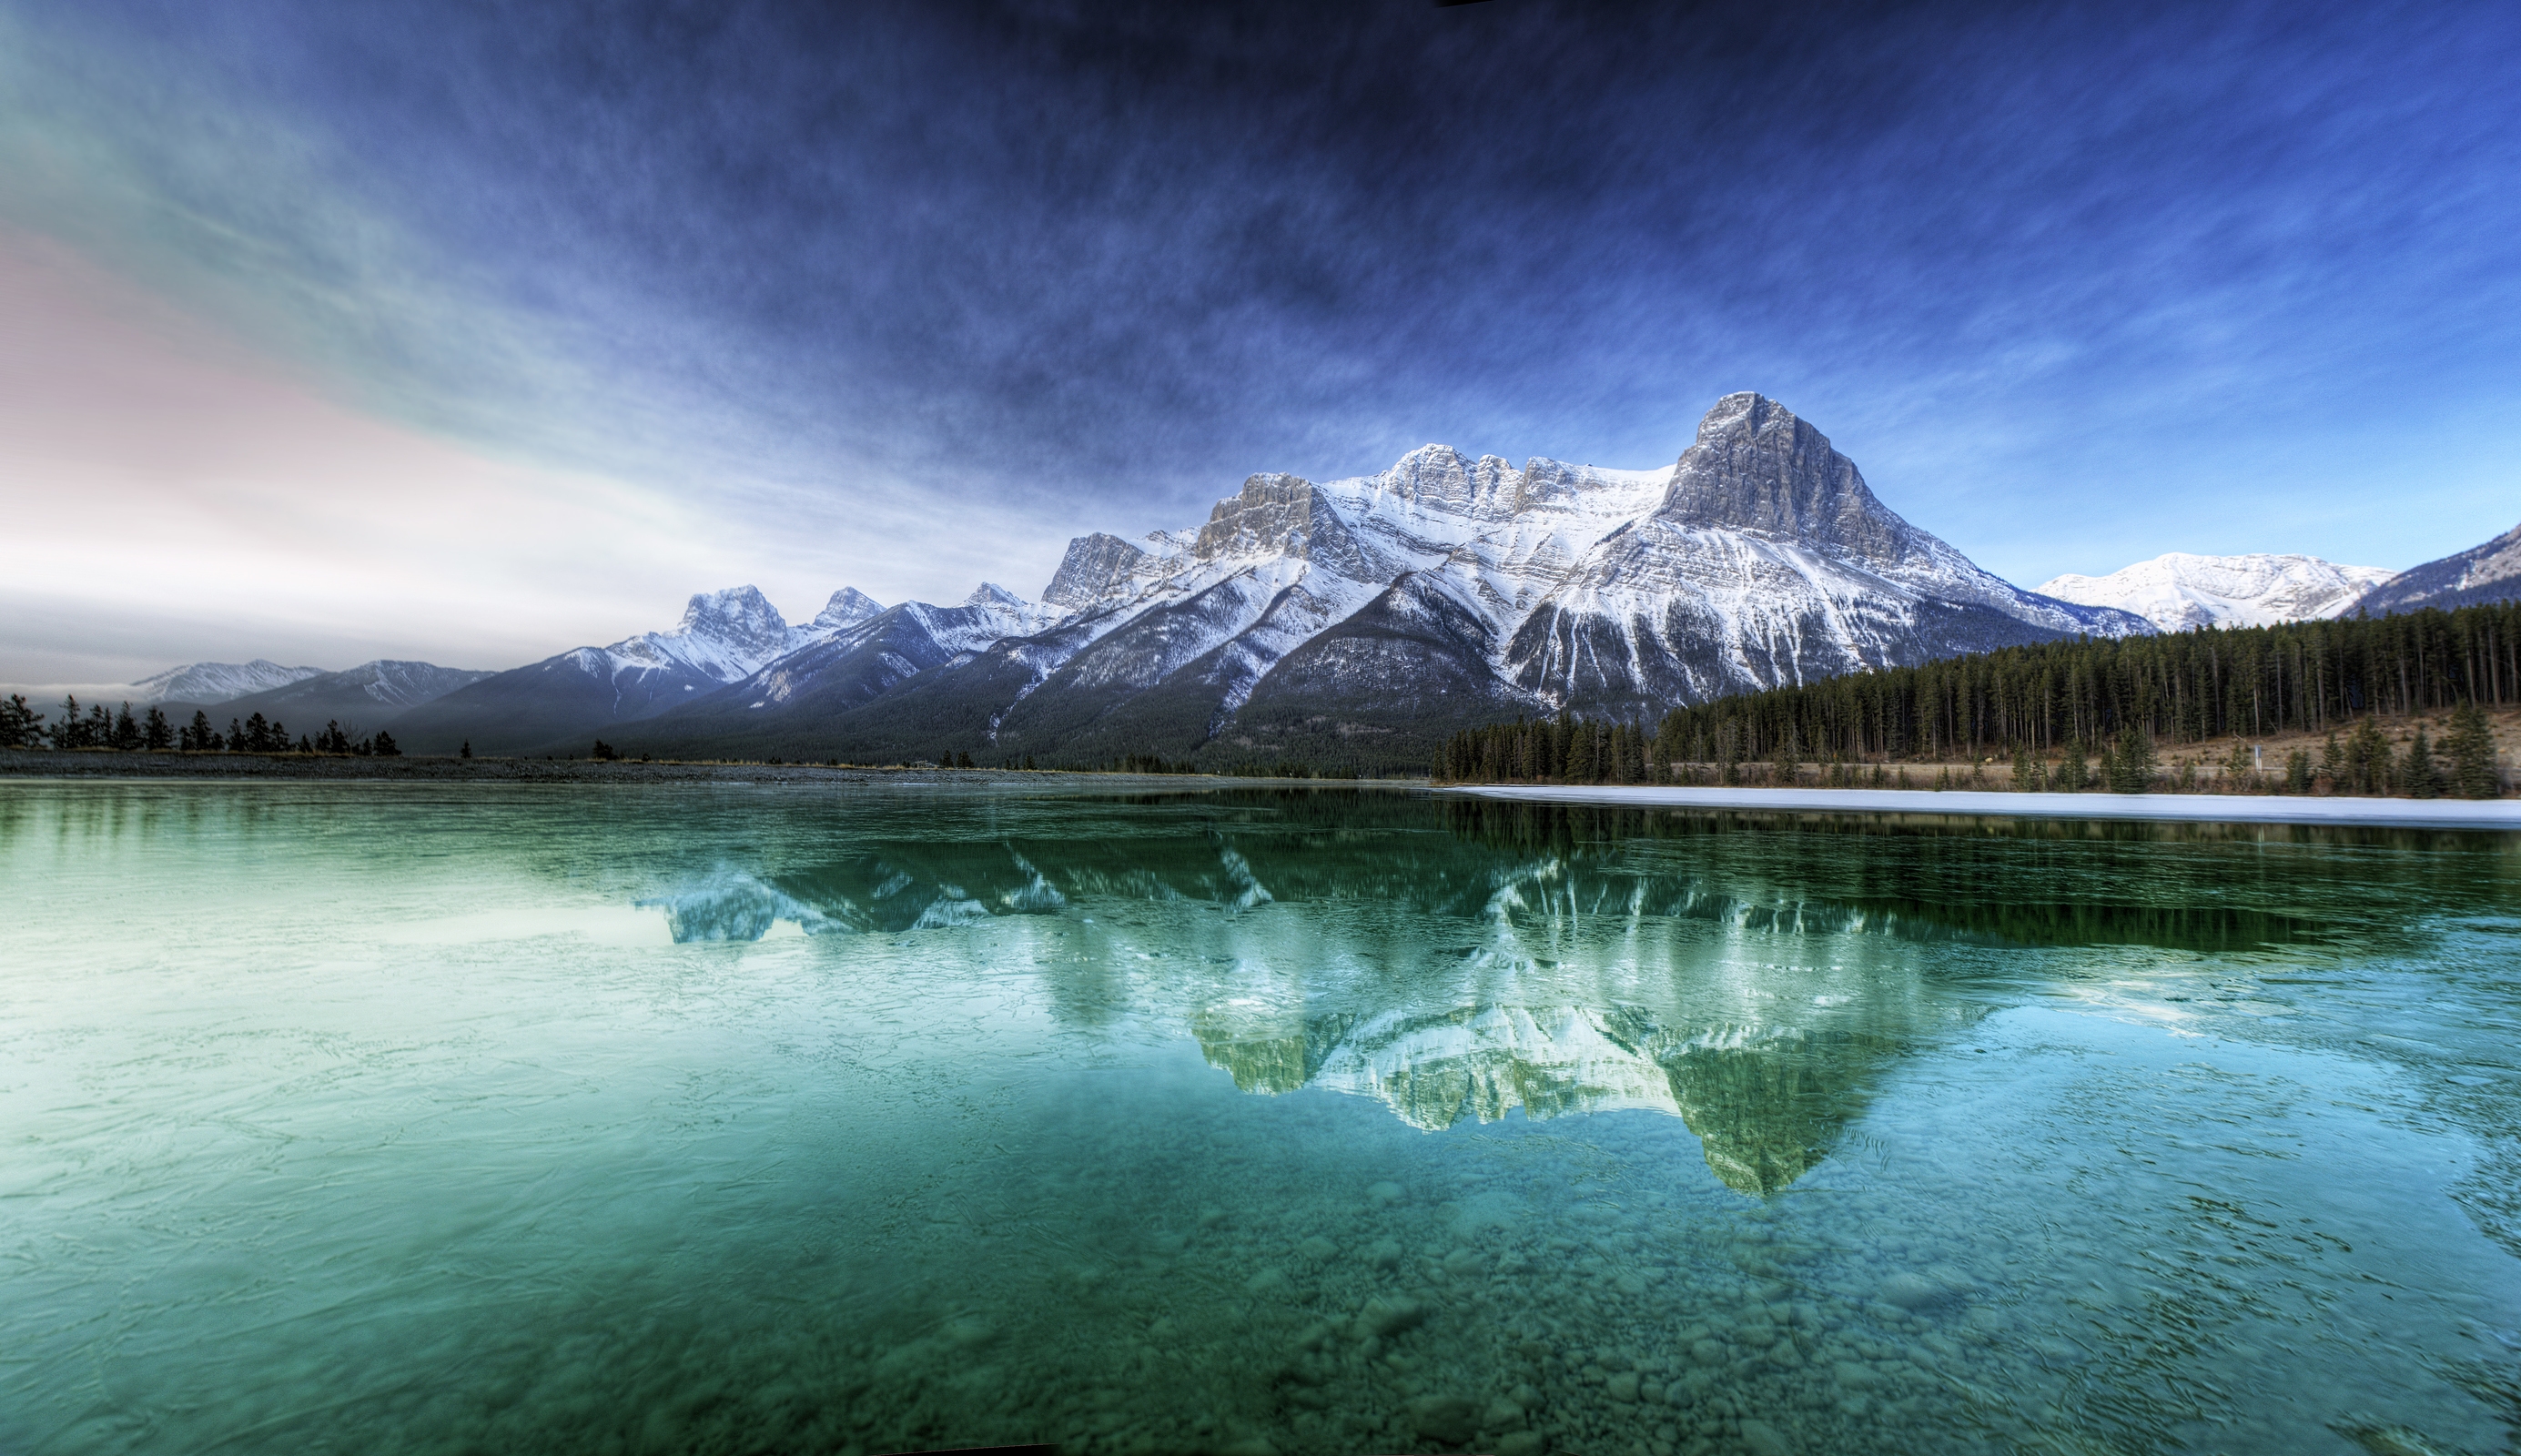 coolness, cool, nature, water, mountains, lake, canada, transparent, freshness, bottom, purity